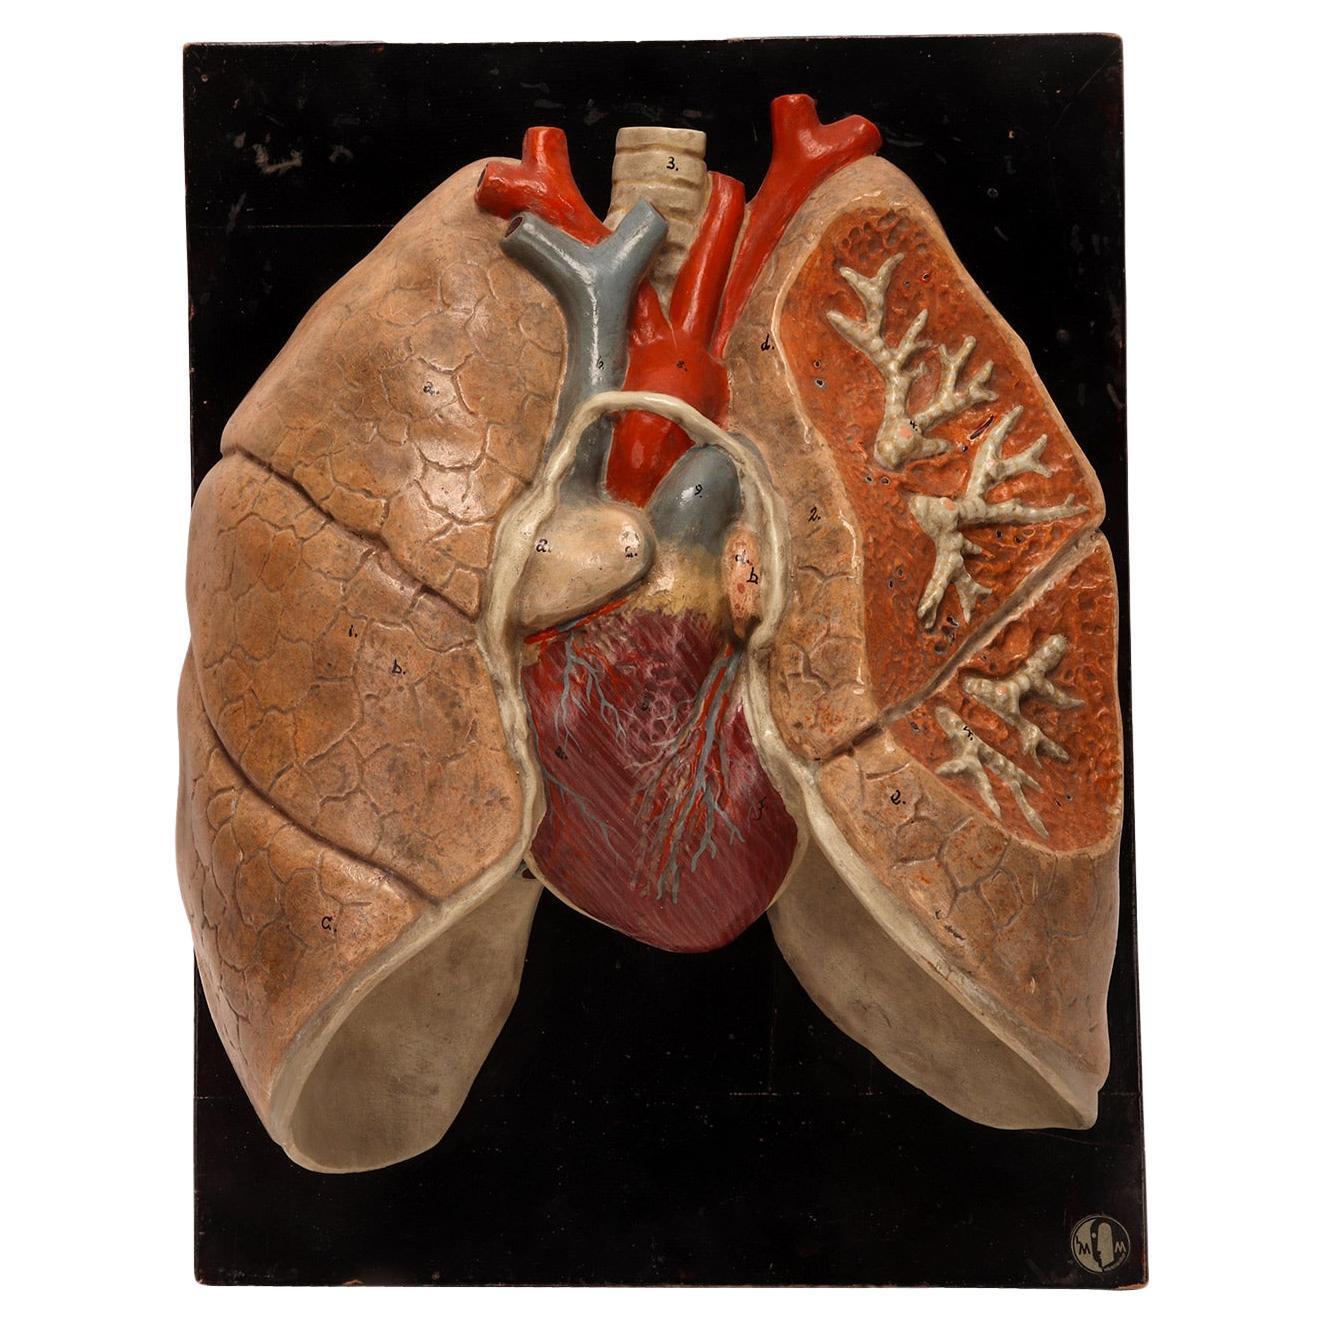 Anatomical Model of the Lungs and Heart, Germany 1920